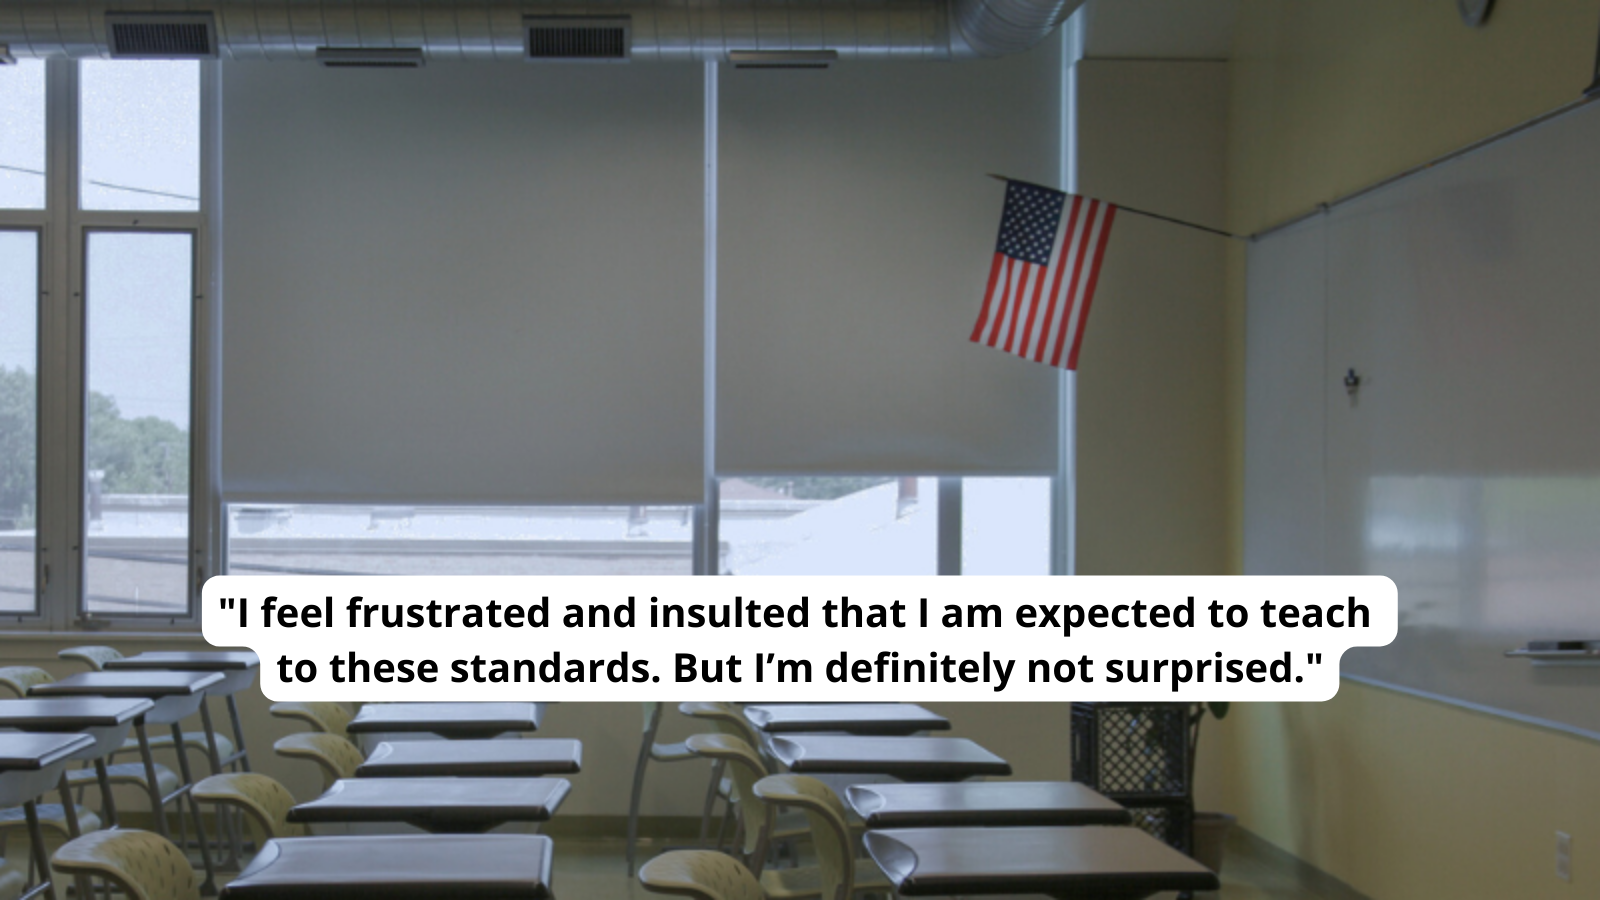 Image of classroom paired with quote about Florida's Black history teaching standards